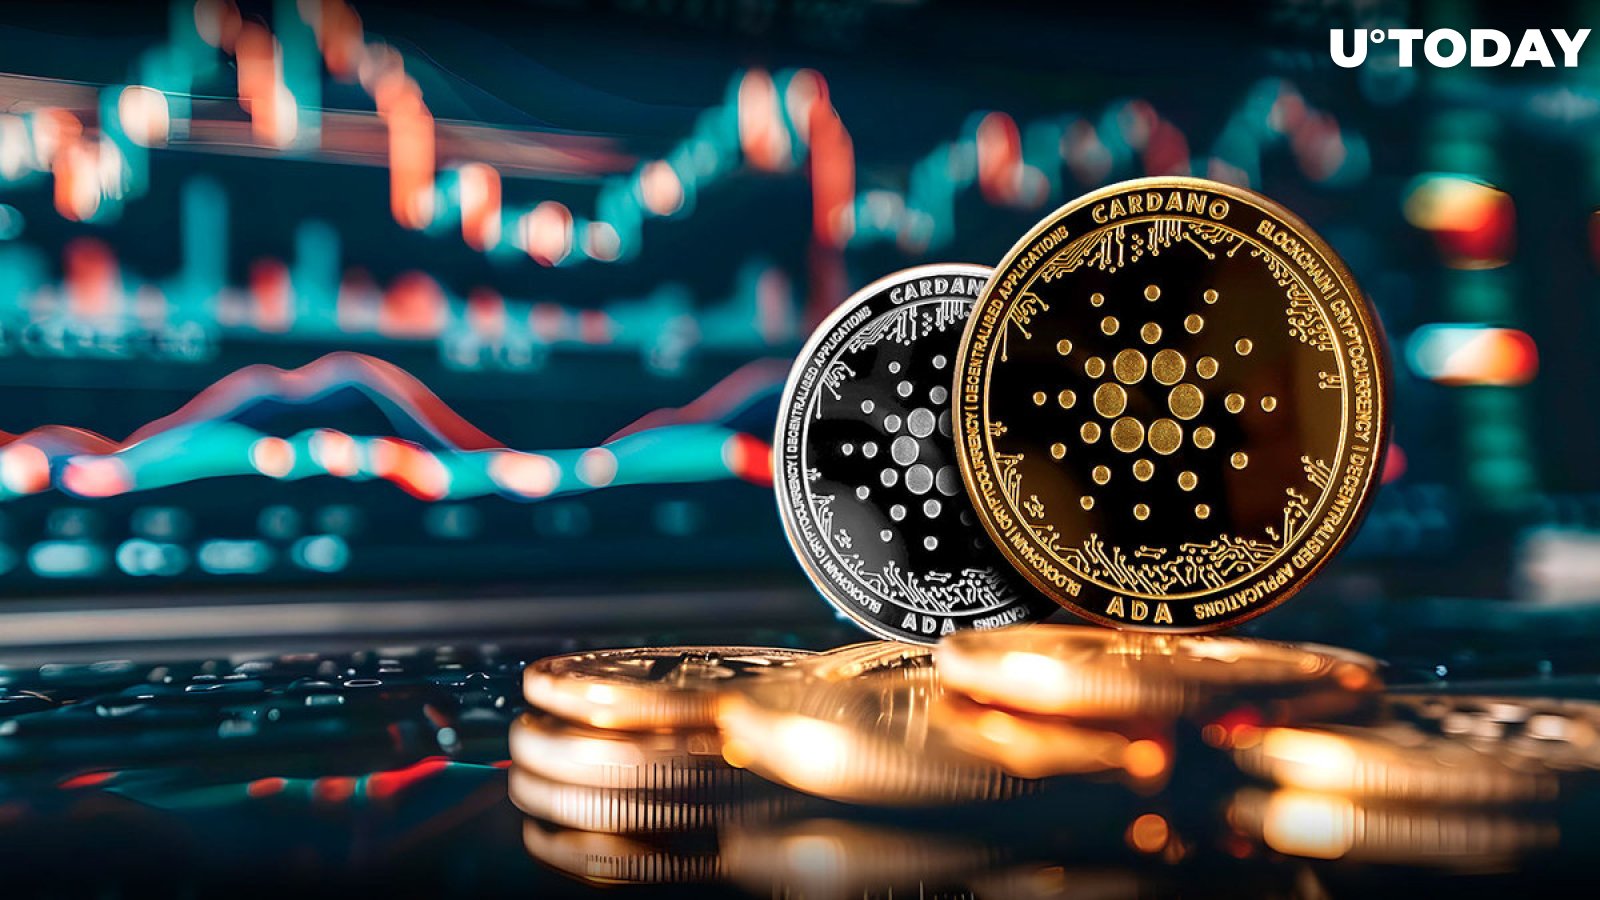 Cardano Skyrockets 300% in Funds Inflows as Bulls Take Charge